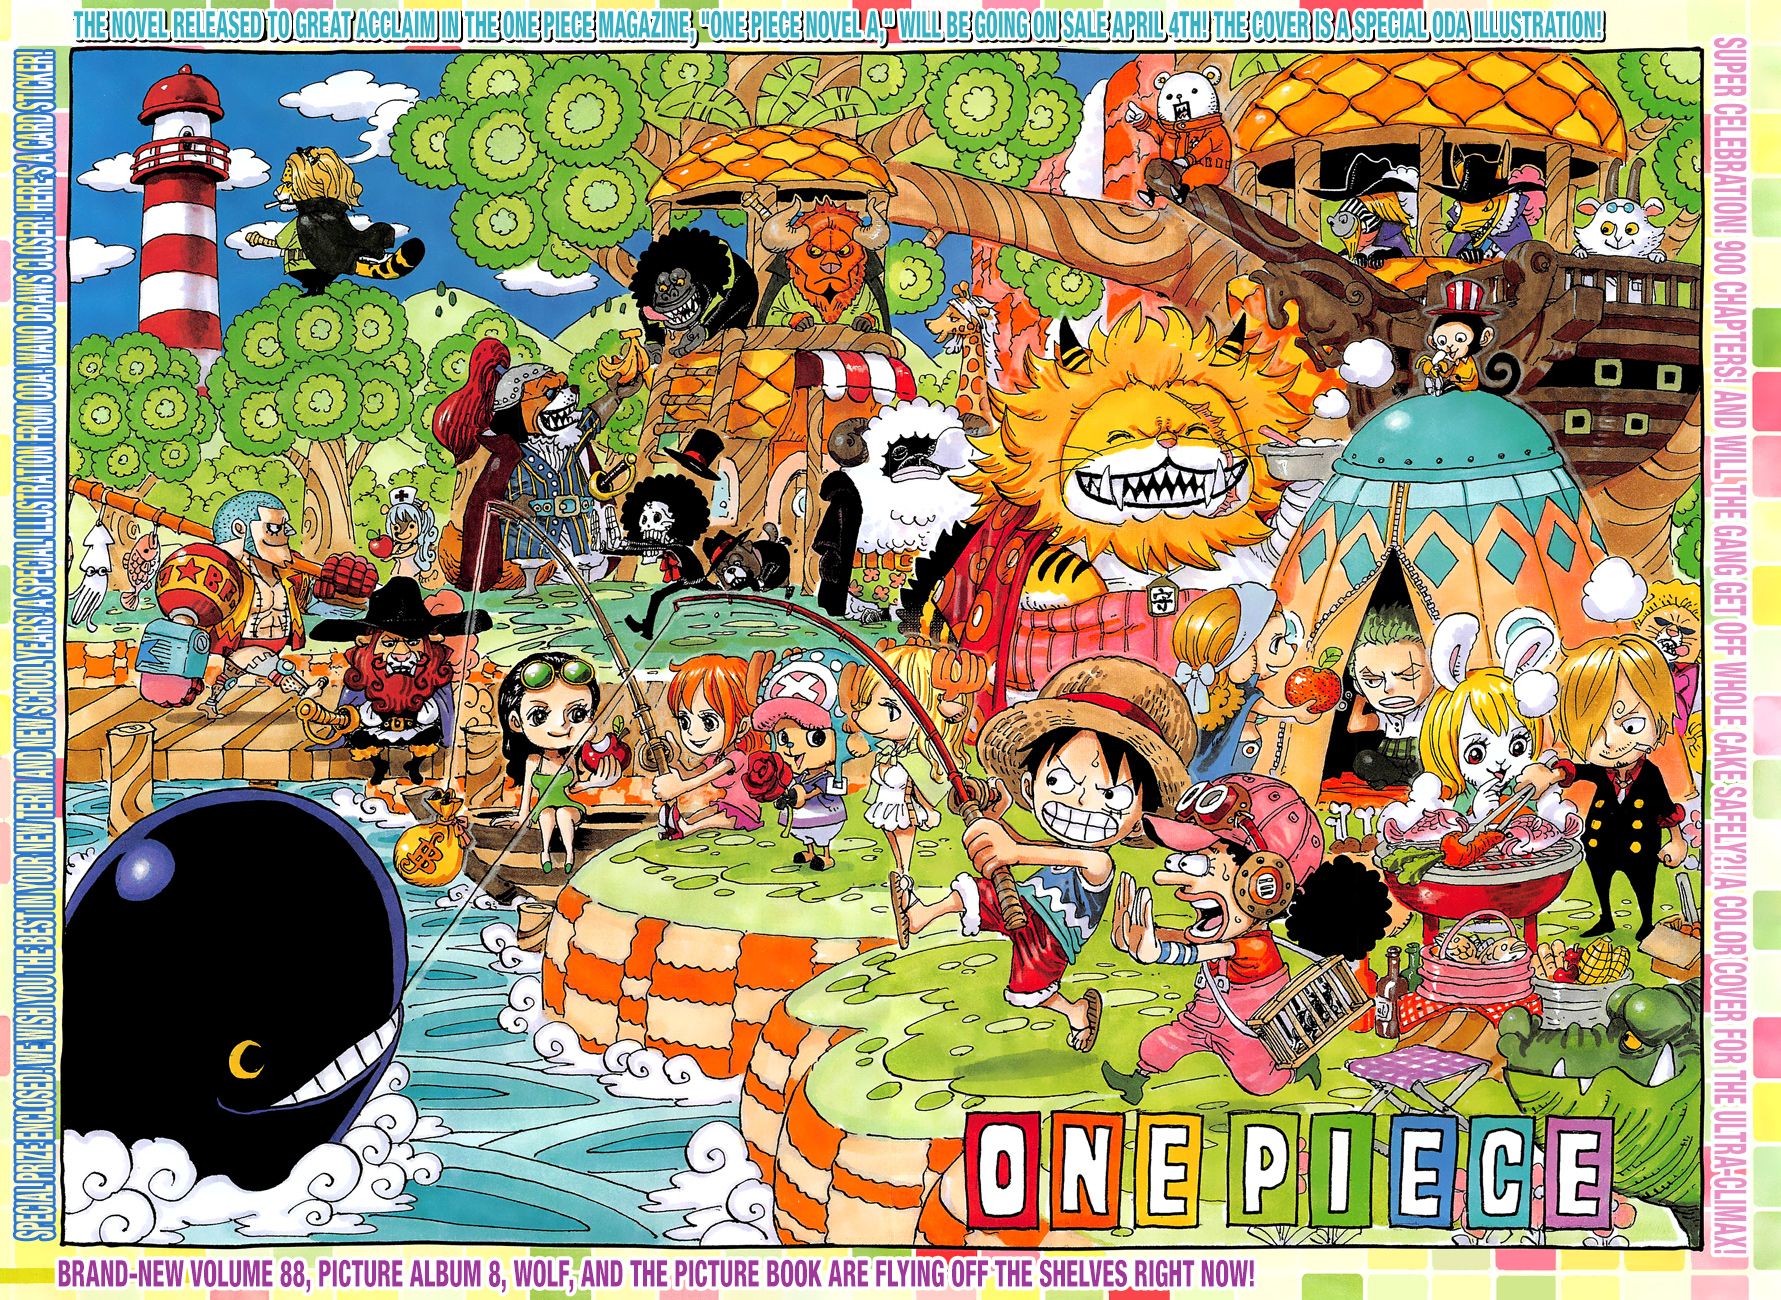 Carrot One Piece Wallpapers - Wallpaper Cave